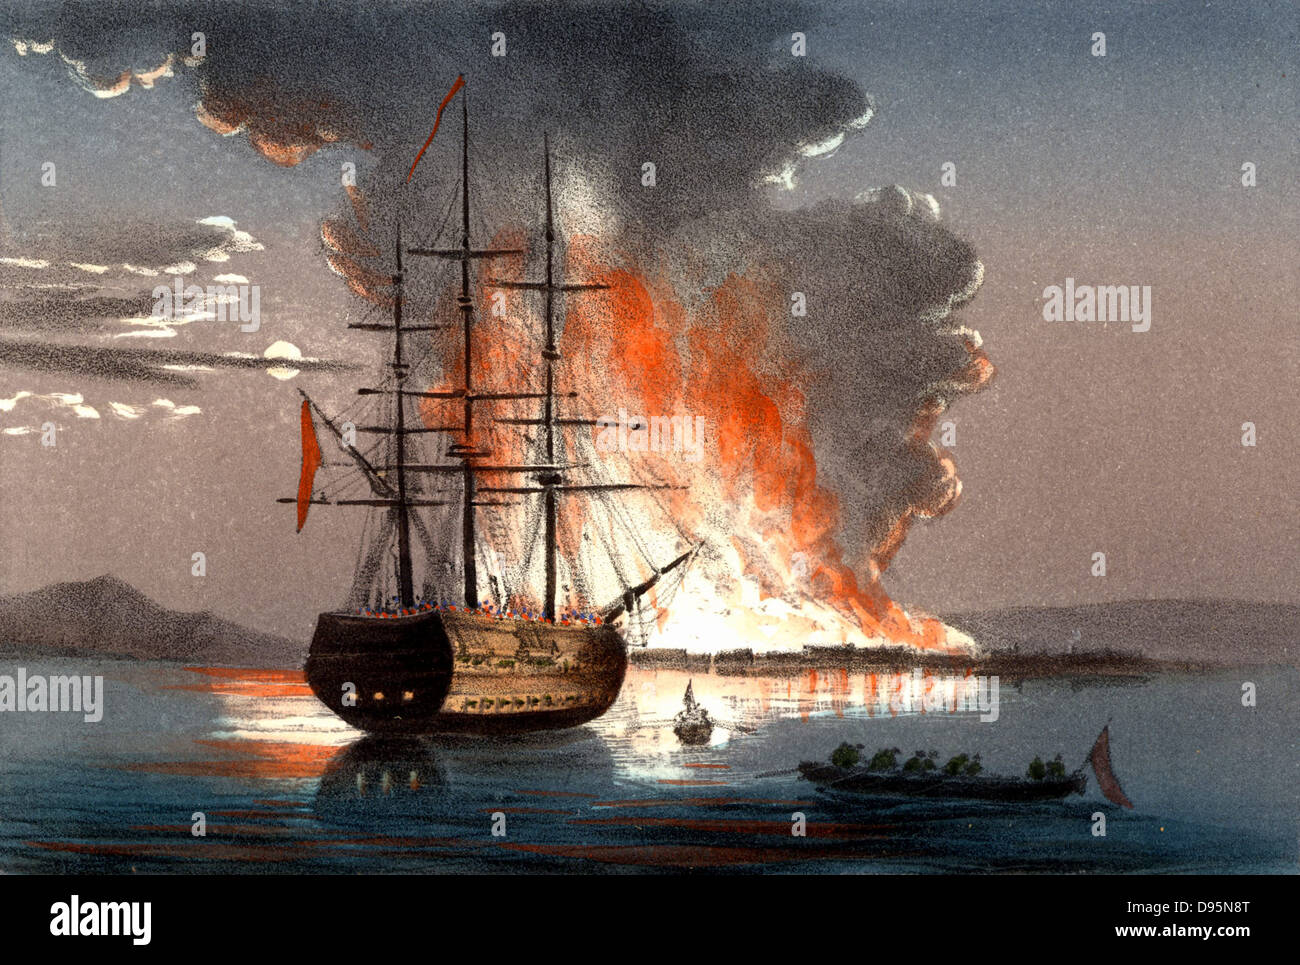 Crimean (Russo-Turkish) War 1853-1856. Burning of the redout at Kale (Canakkale) at the mouth of the Dardanelles (the Hellespont). Hand-coloured lithograph published in Italy 1857. Stock Photo